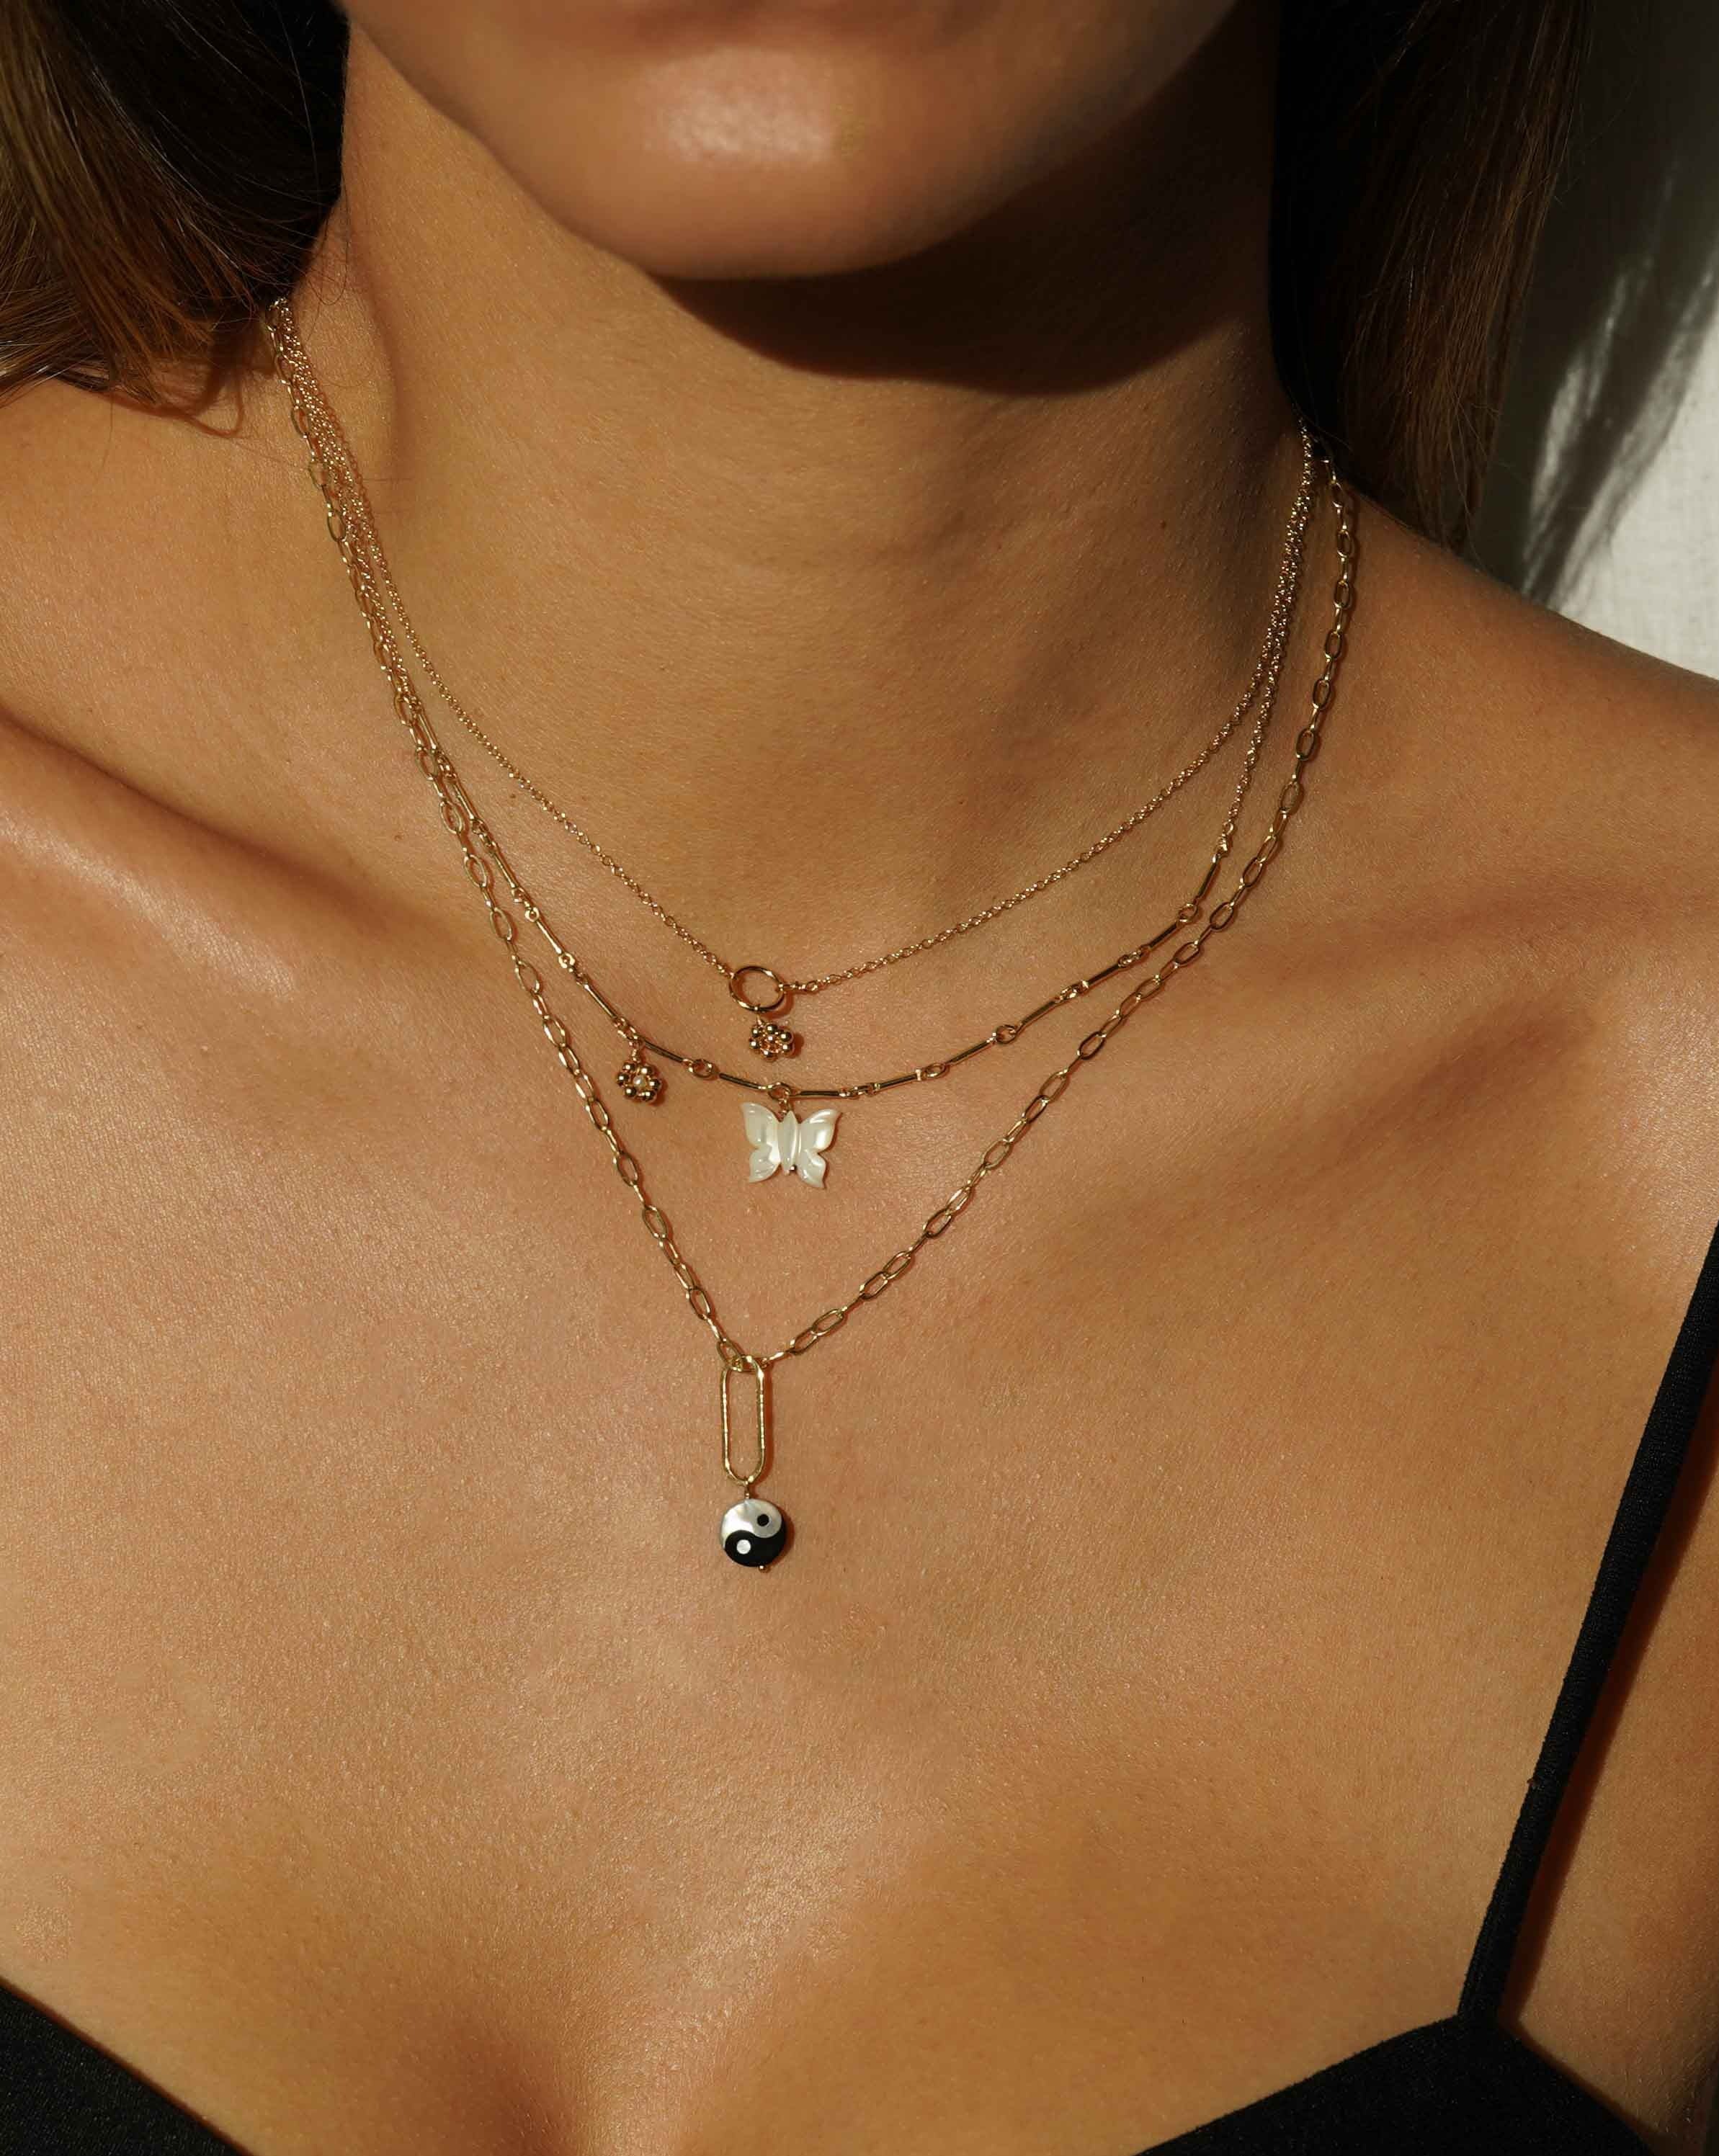 Tinley Necklace by KOZAKH. A 16 to 18 inch adjustable length necklace, with flat cable chain on top half and bar link chain on bottom half, crafted in 14K Gold Filled, featuring a hand-carved Mother of Pearl butterfly charm and a handmade gold beaded daisy with 2mm pearl in the center.